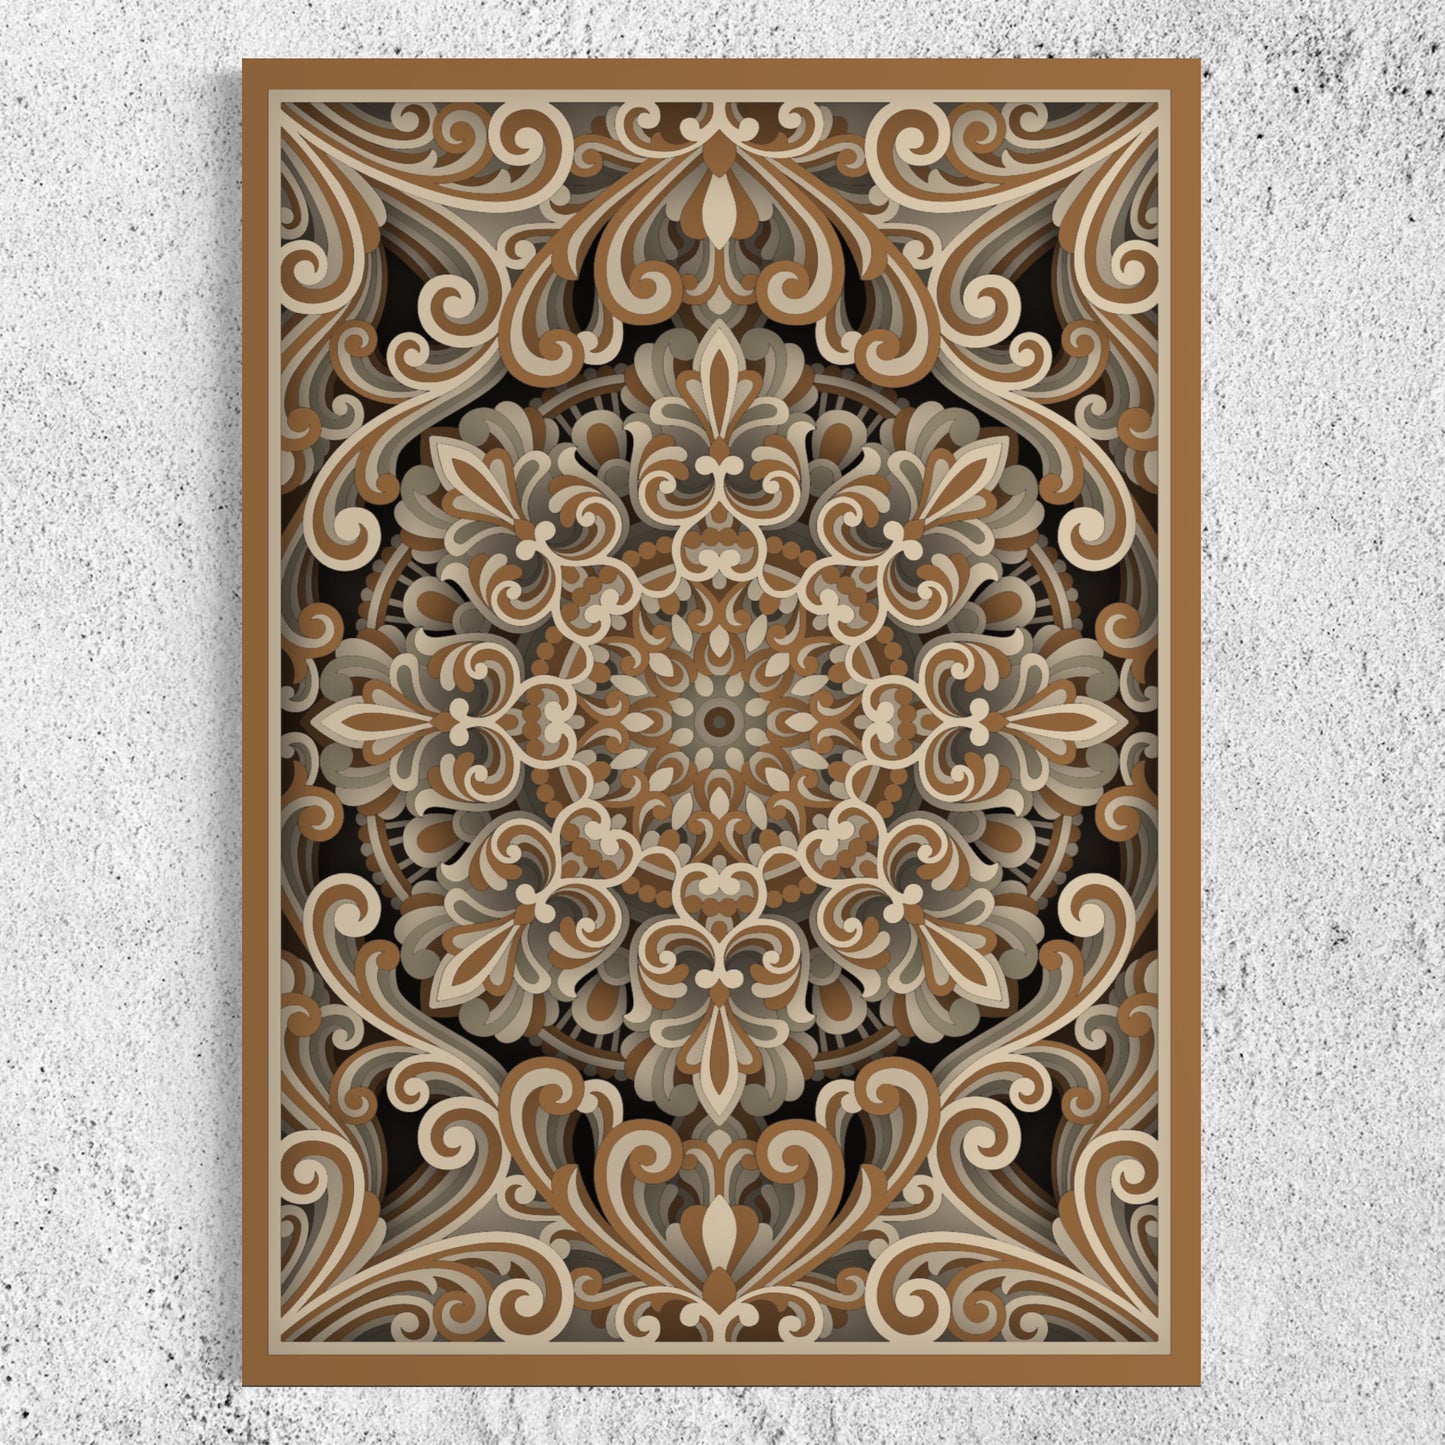 Nebula Wooden Wall Art | 22 x 30 Inch | Color Woody Brown, Dull Brown, Warm Grey And Coriander